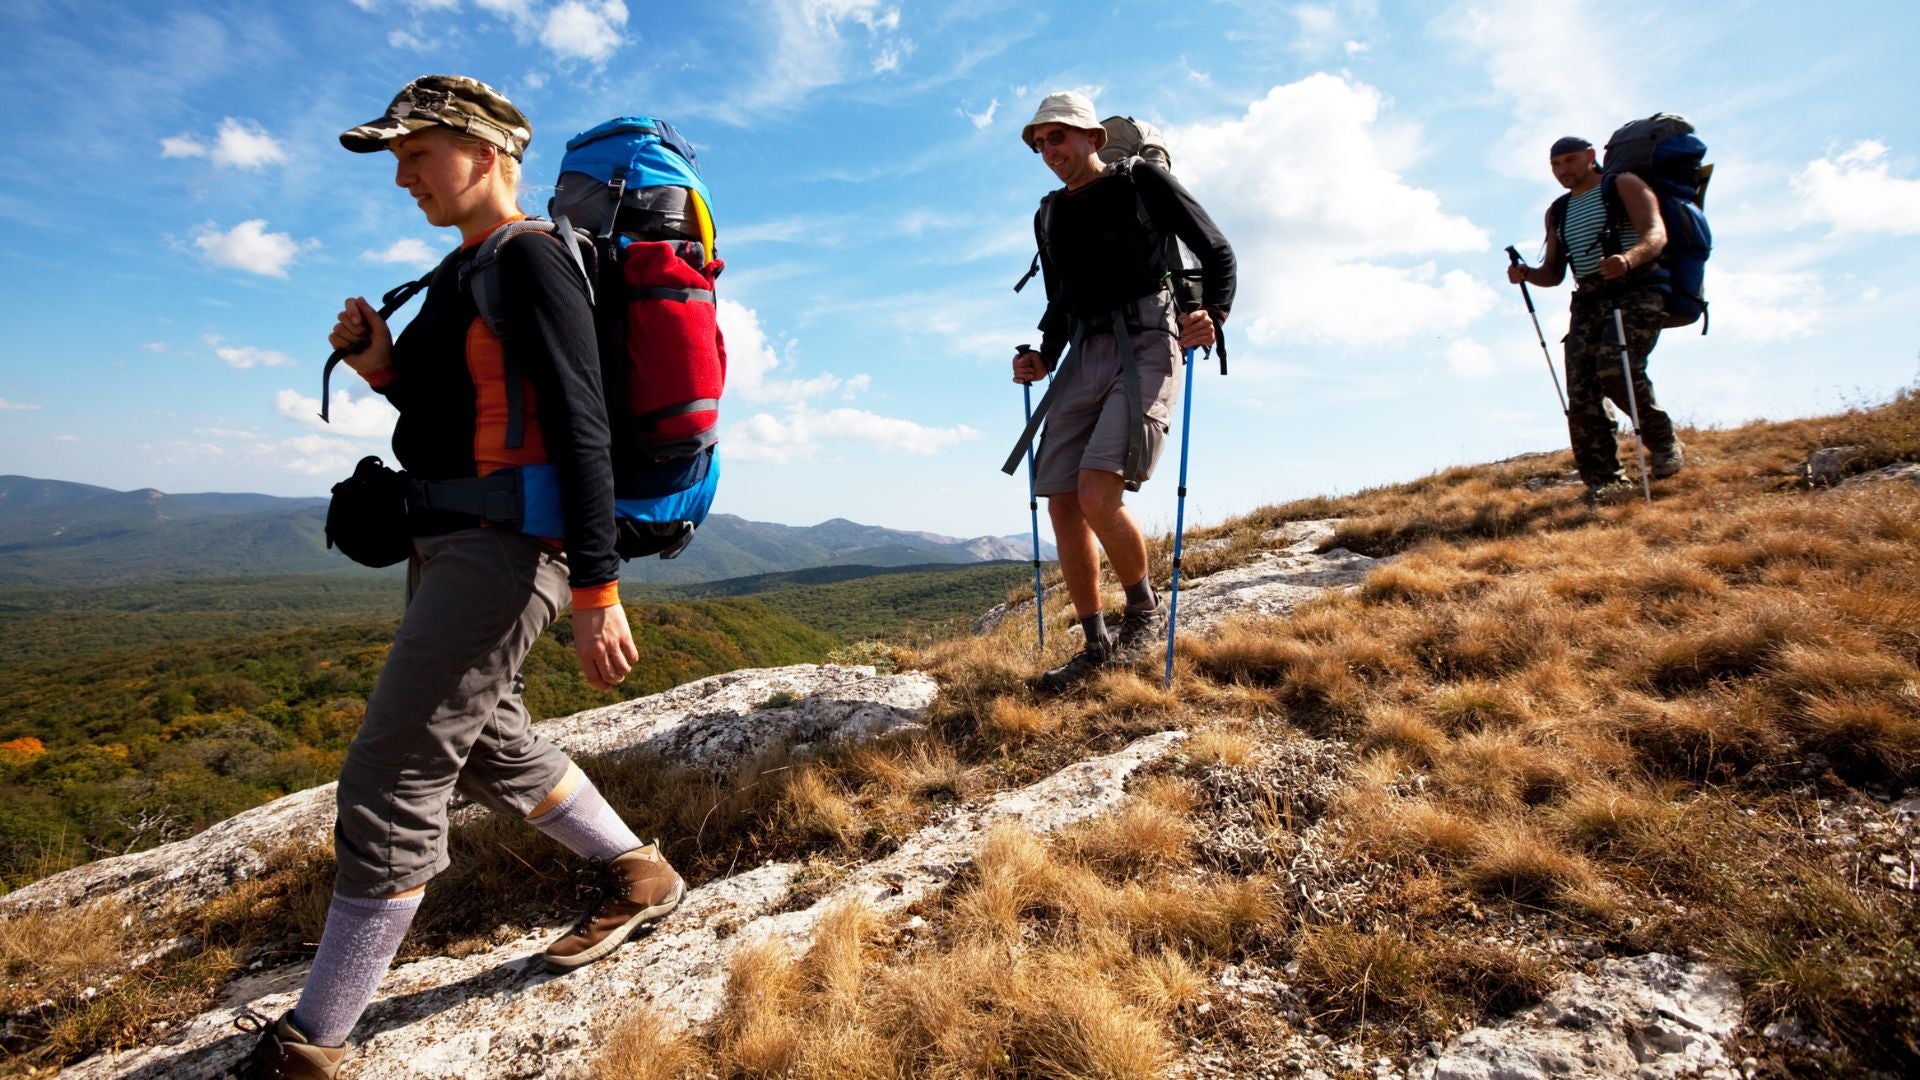 Hiking Safety: Another Look at the 10 Essentials - American Hiking Society